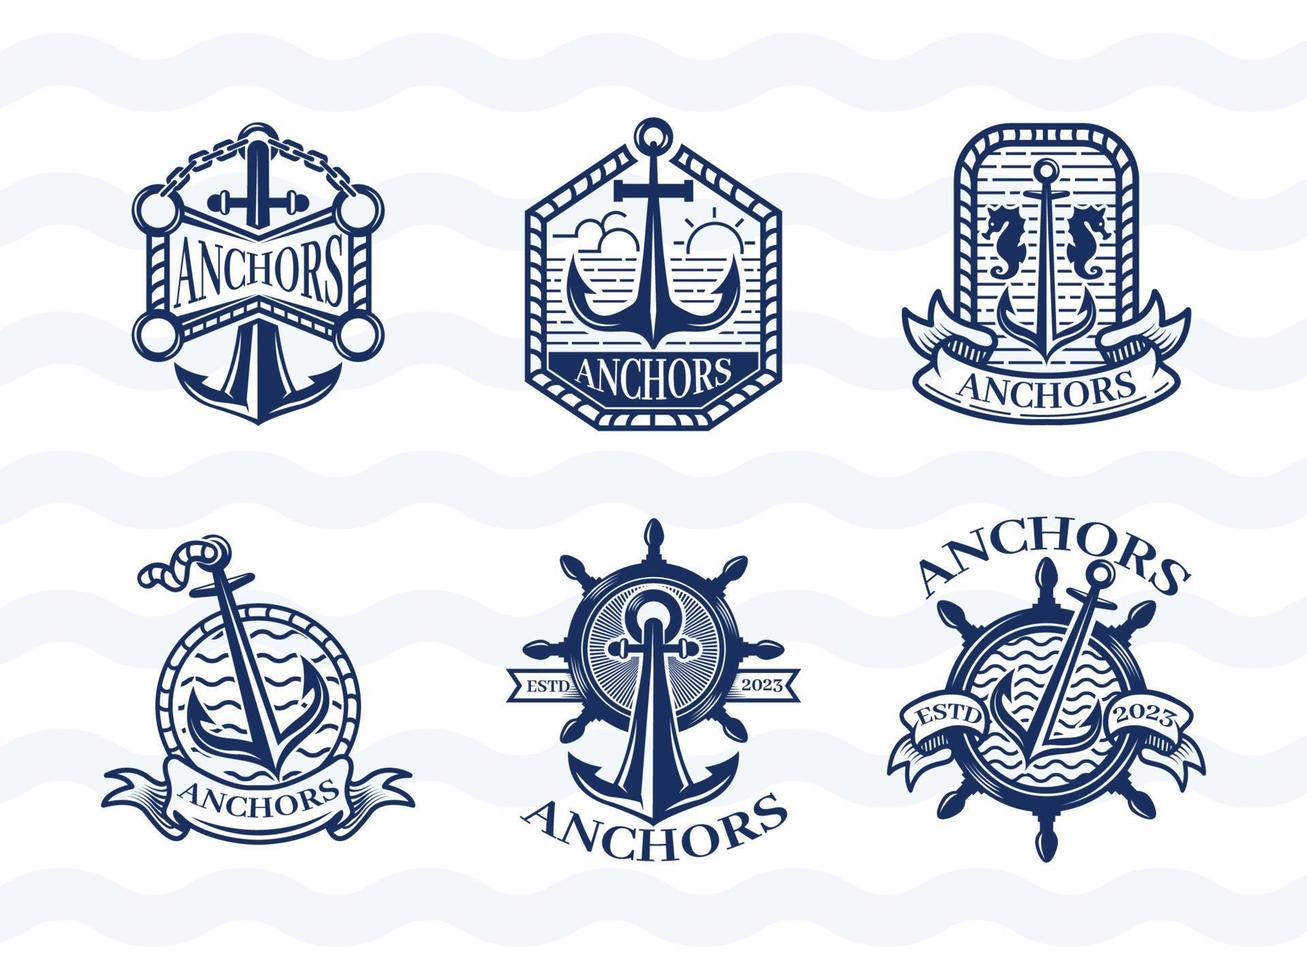 Logo Anchors with Vintage Style vector